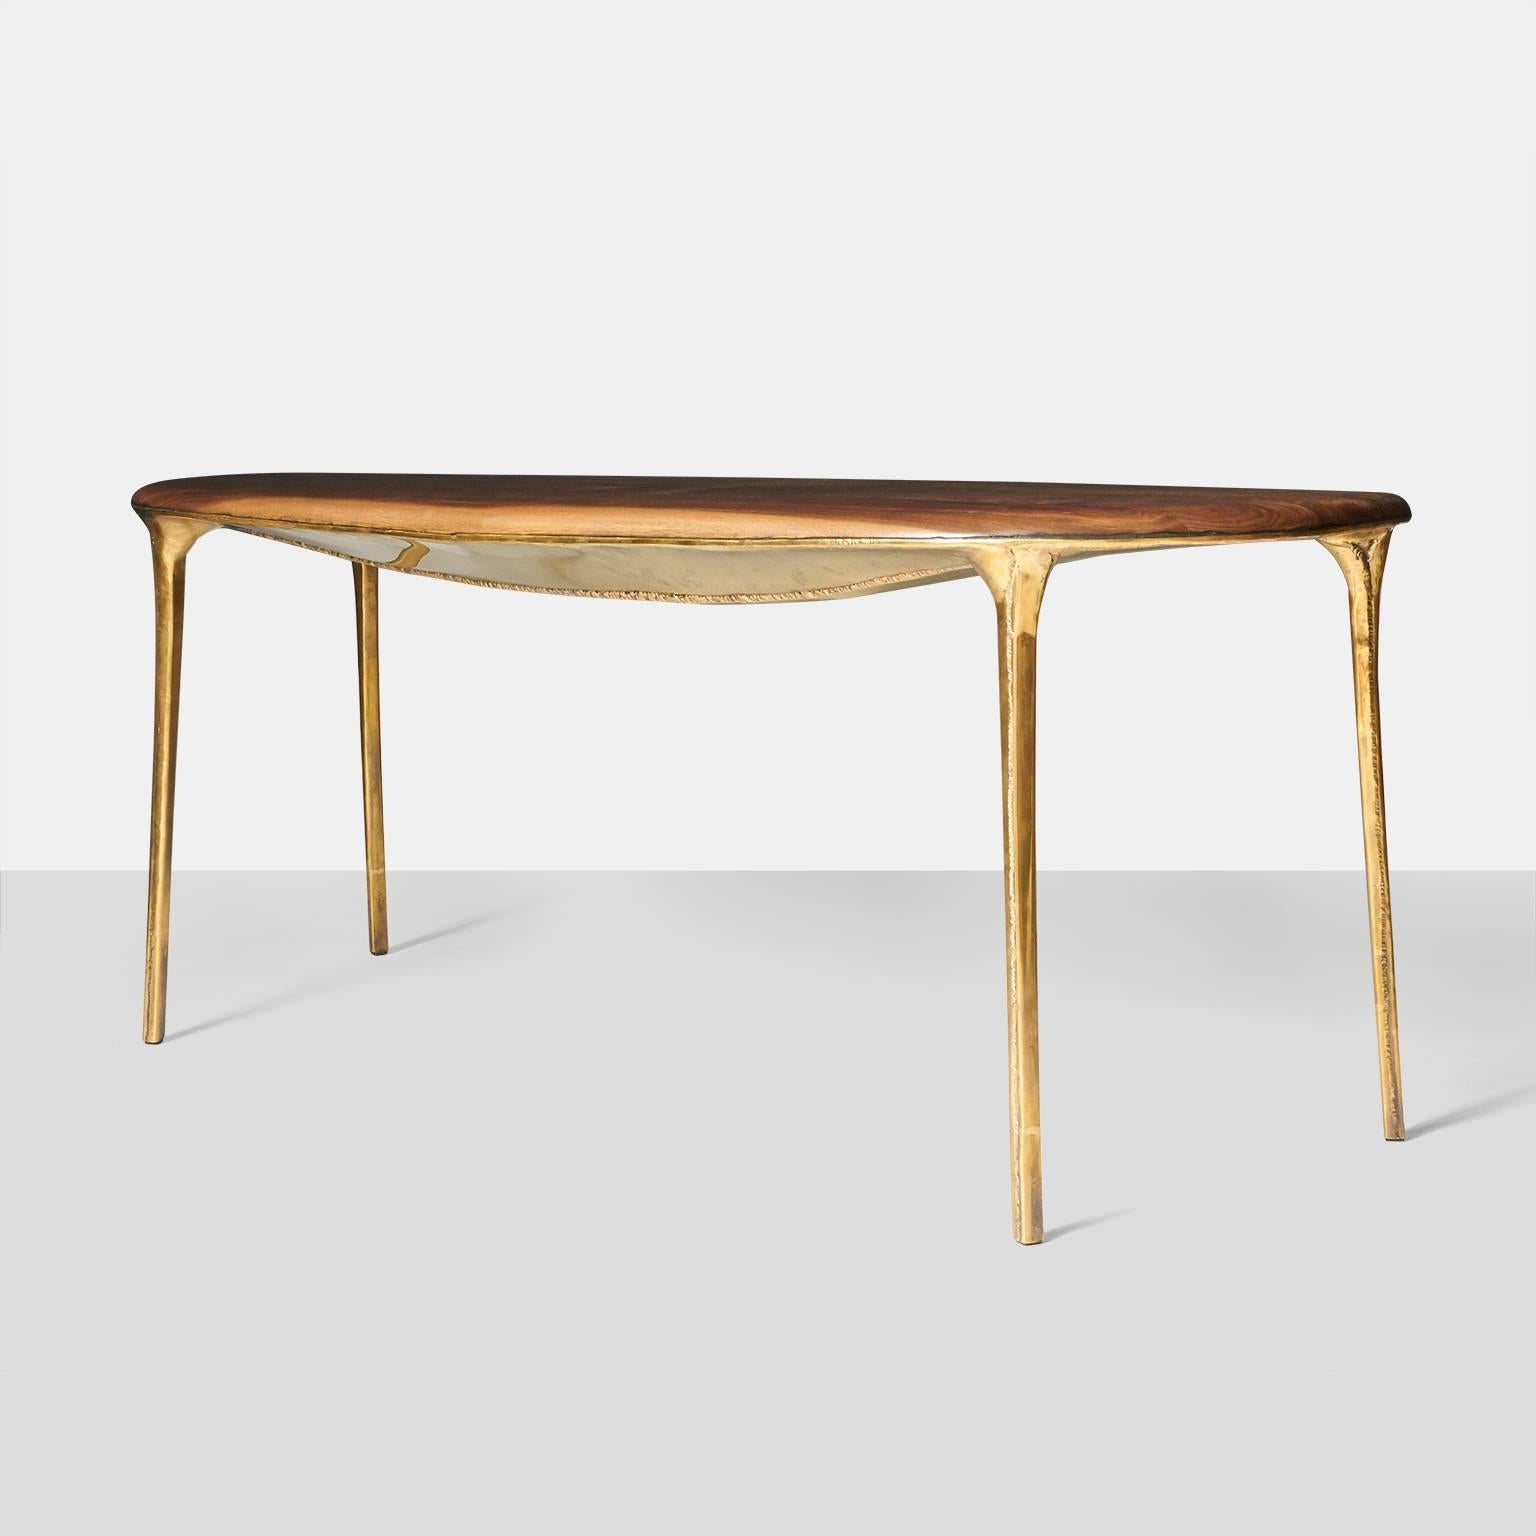 A dining table or desk by Valentin Loellmann in hand worked brass with a walnut top. The shape is an organic oval and the underside has a unique detail.
Each piece is completely handmade by Valentin Loellmann and all are signed and numbered. Almond